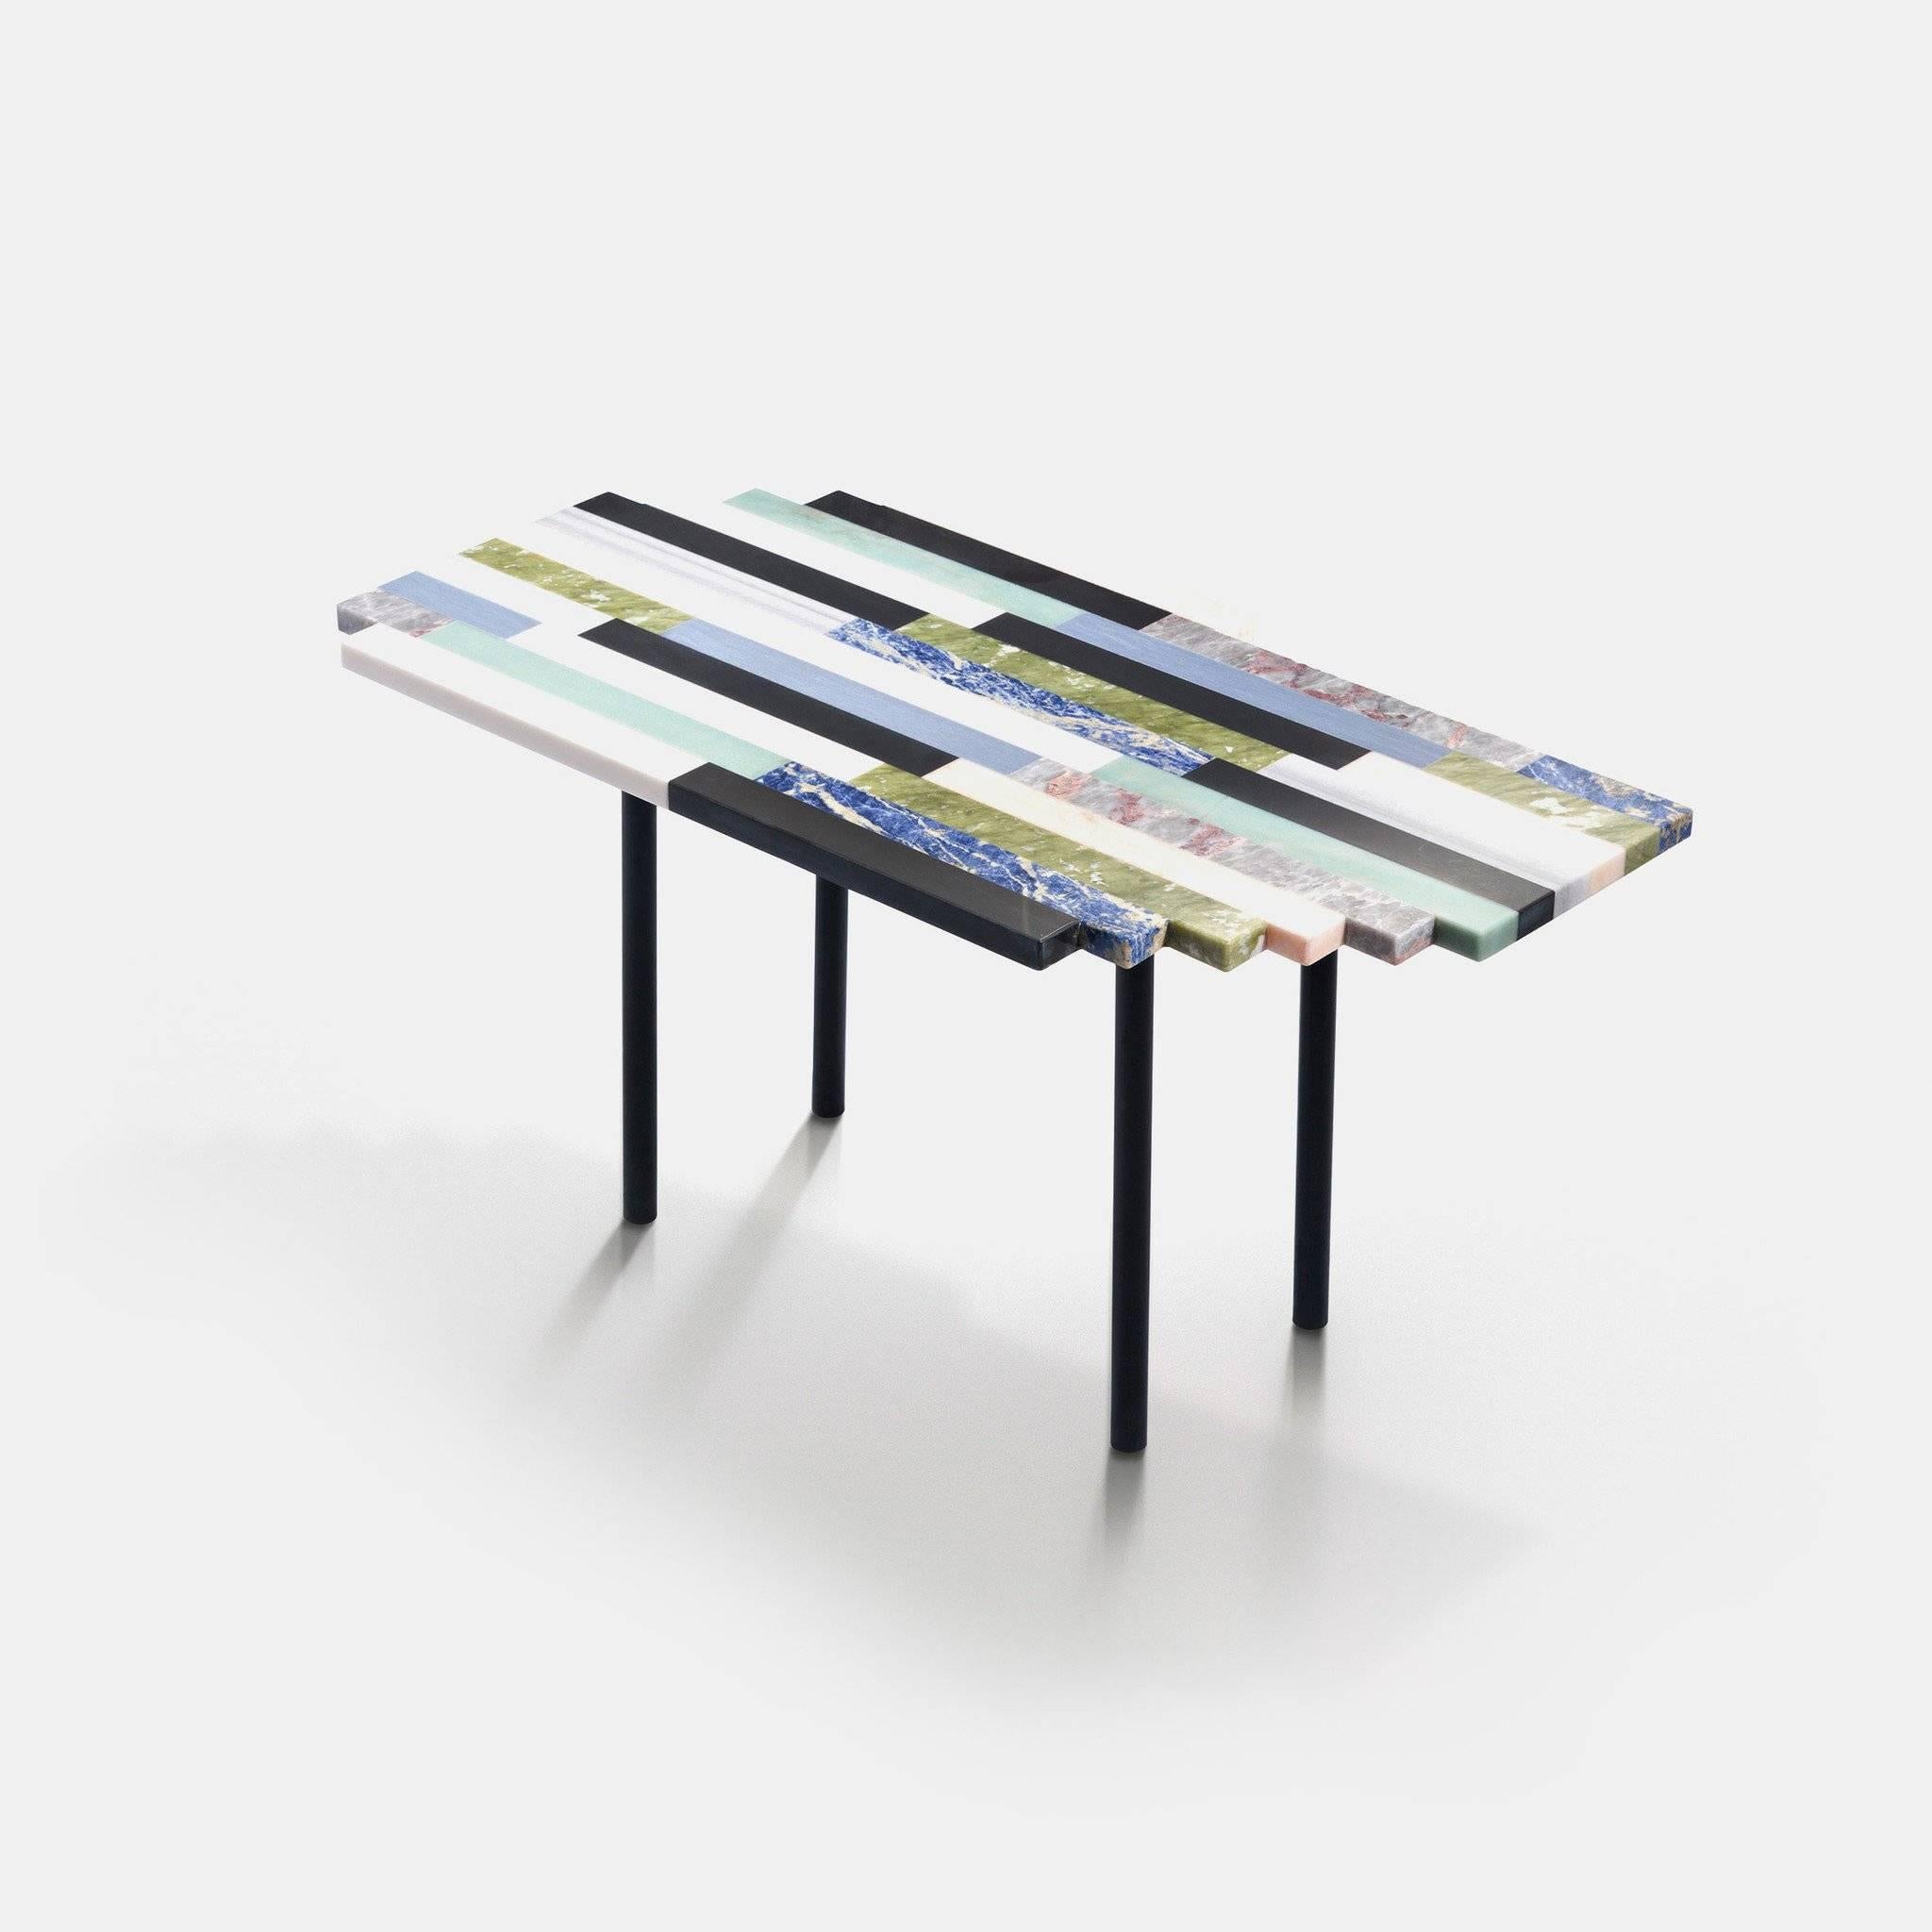 Made of onyx and marble stripes, this coffee table features a geometrical and multicolored inlay pattern. Just like a puzzle, the zigzag edges can interlock with other tables from the same collection, creating compositions with a polychrome parquet